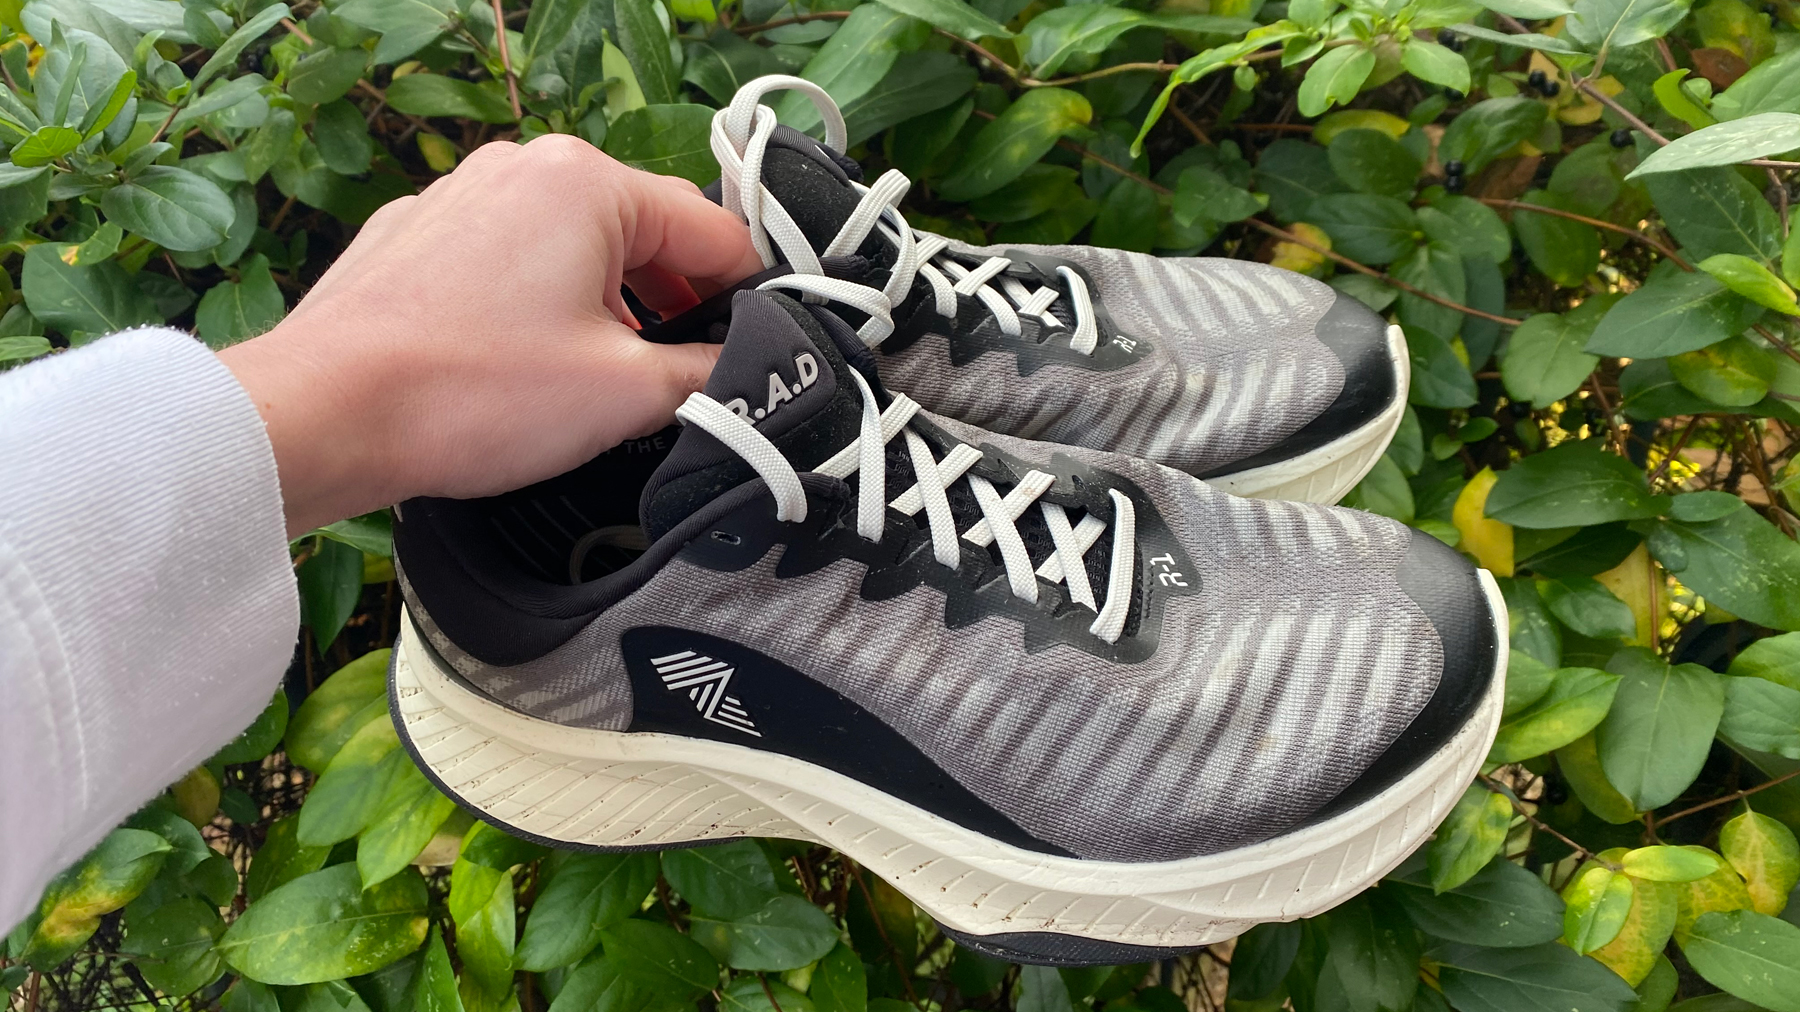 Hoka Clifton 8 Review—See Why Our Editor Loves Marathon Training in These